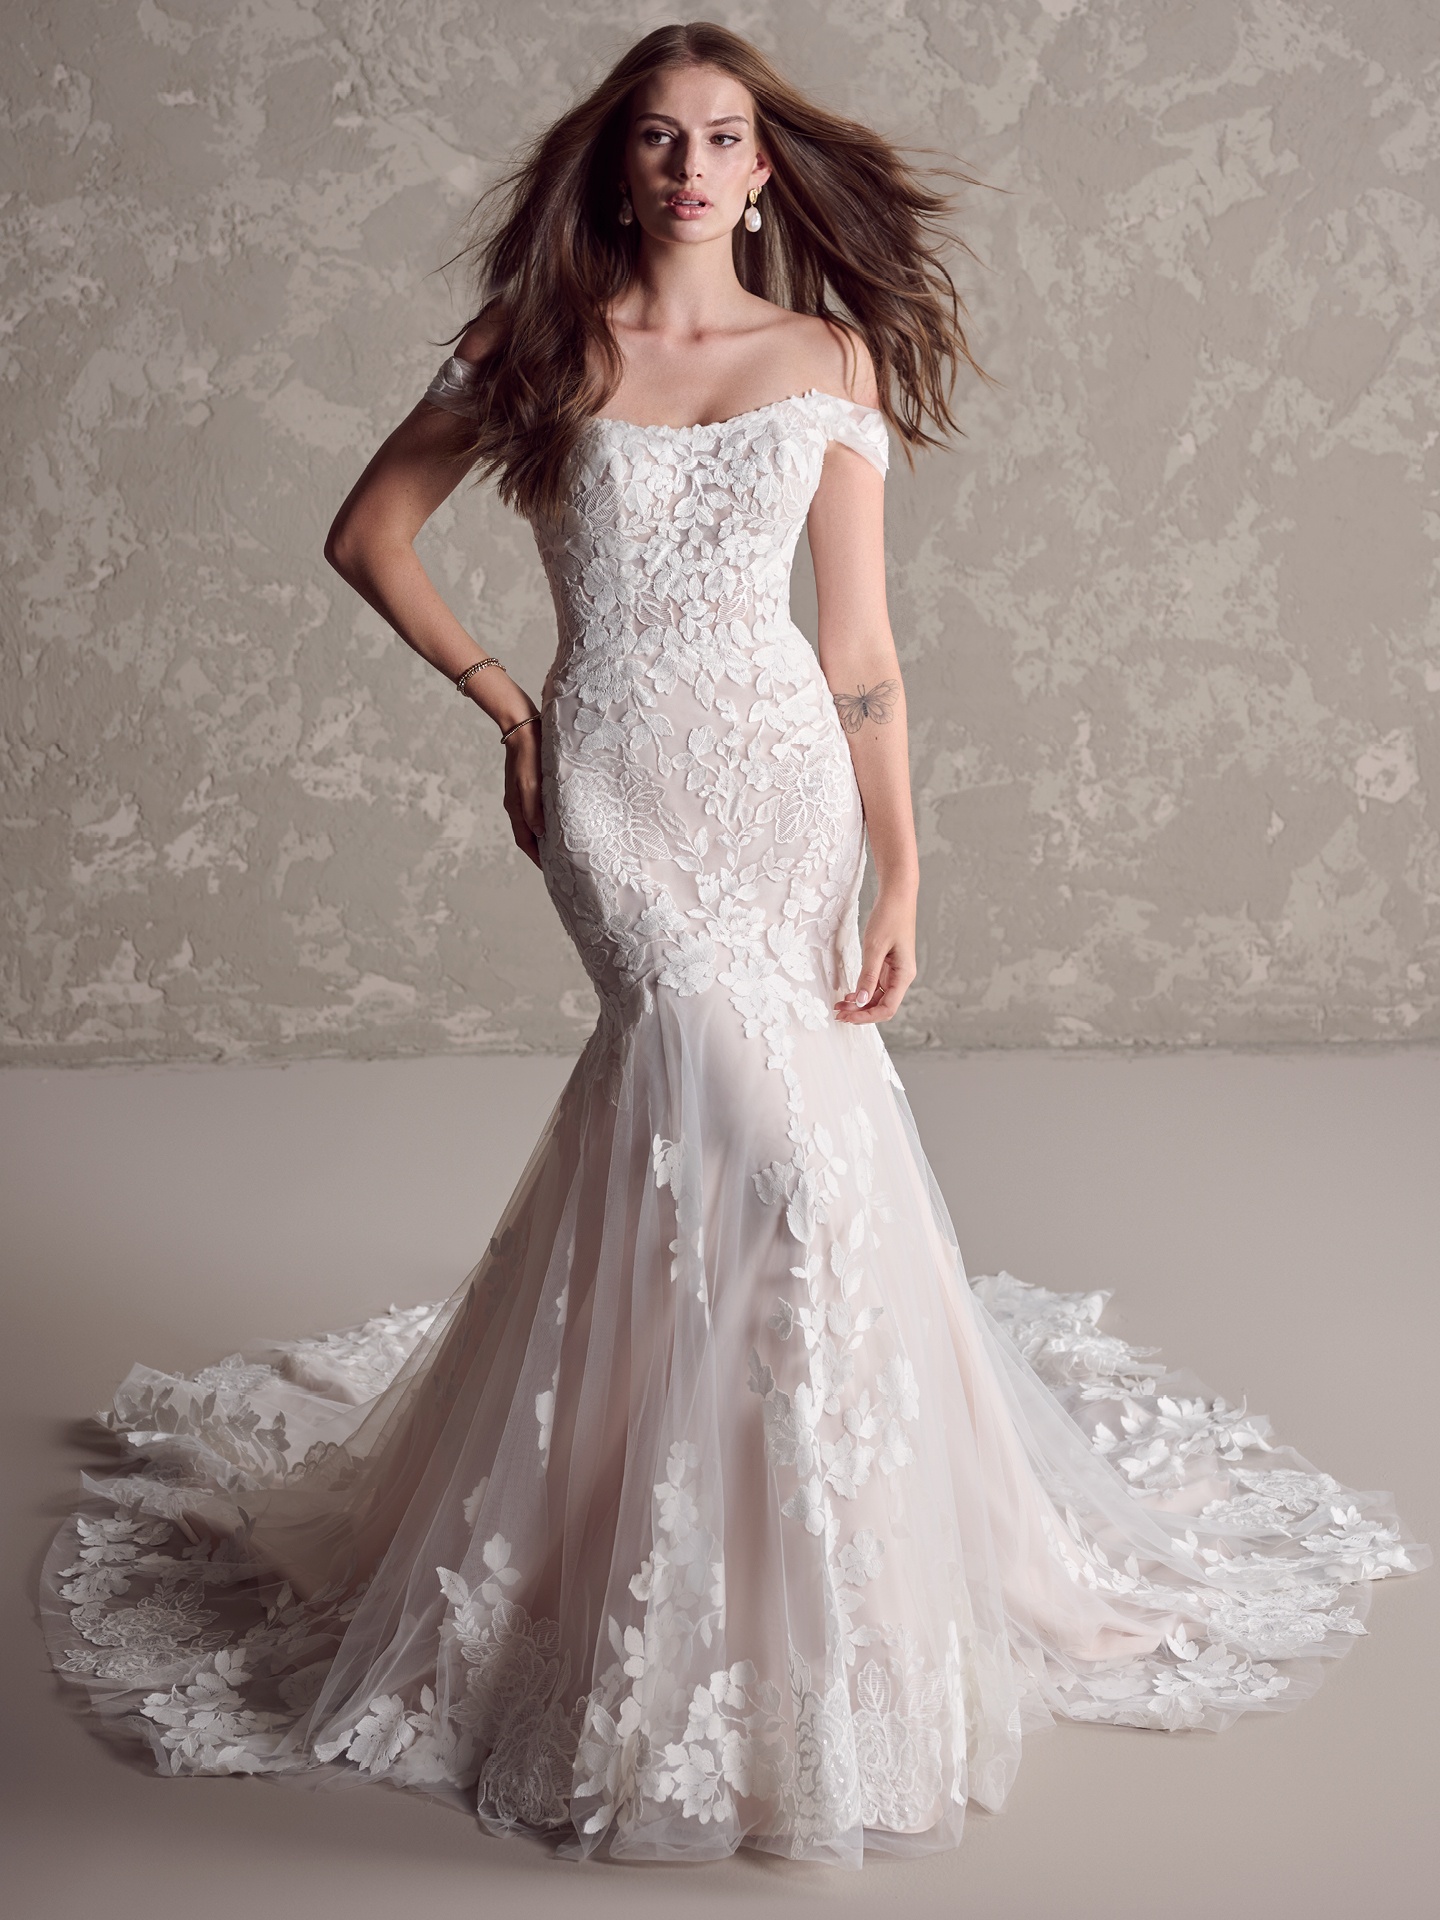 33 Gorgeous Lace Gown Styles for Wedding to Consider - OD9JASTYLES